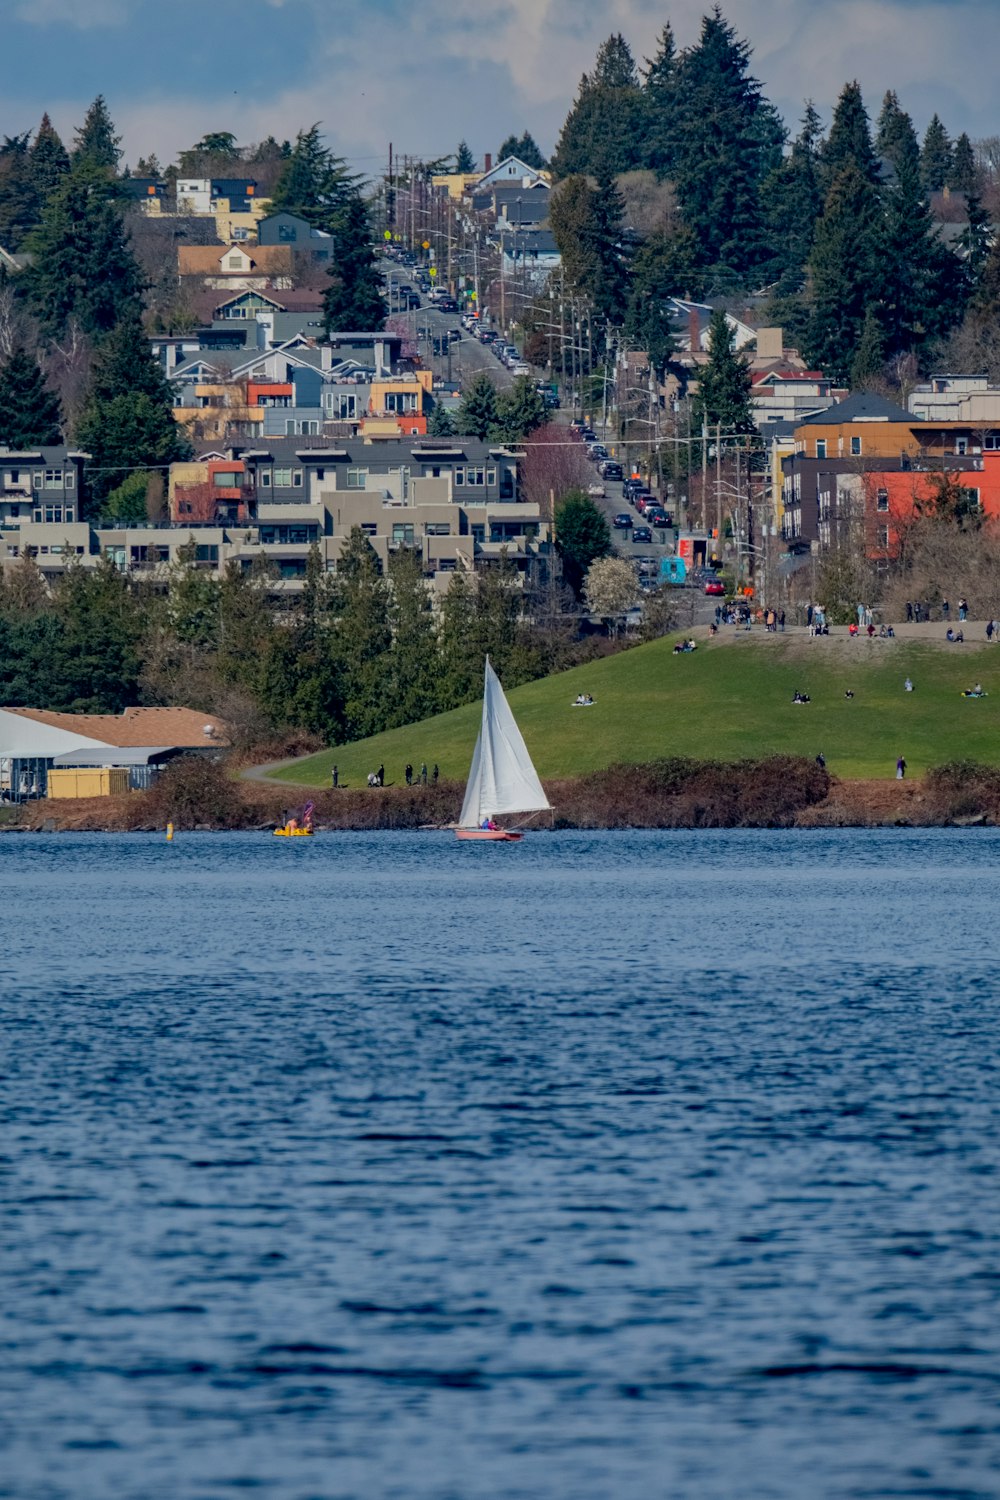 a sailboat on a body of water with a city in the background